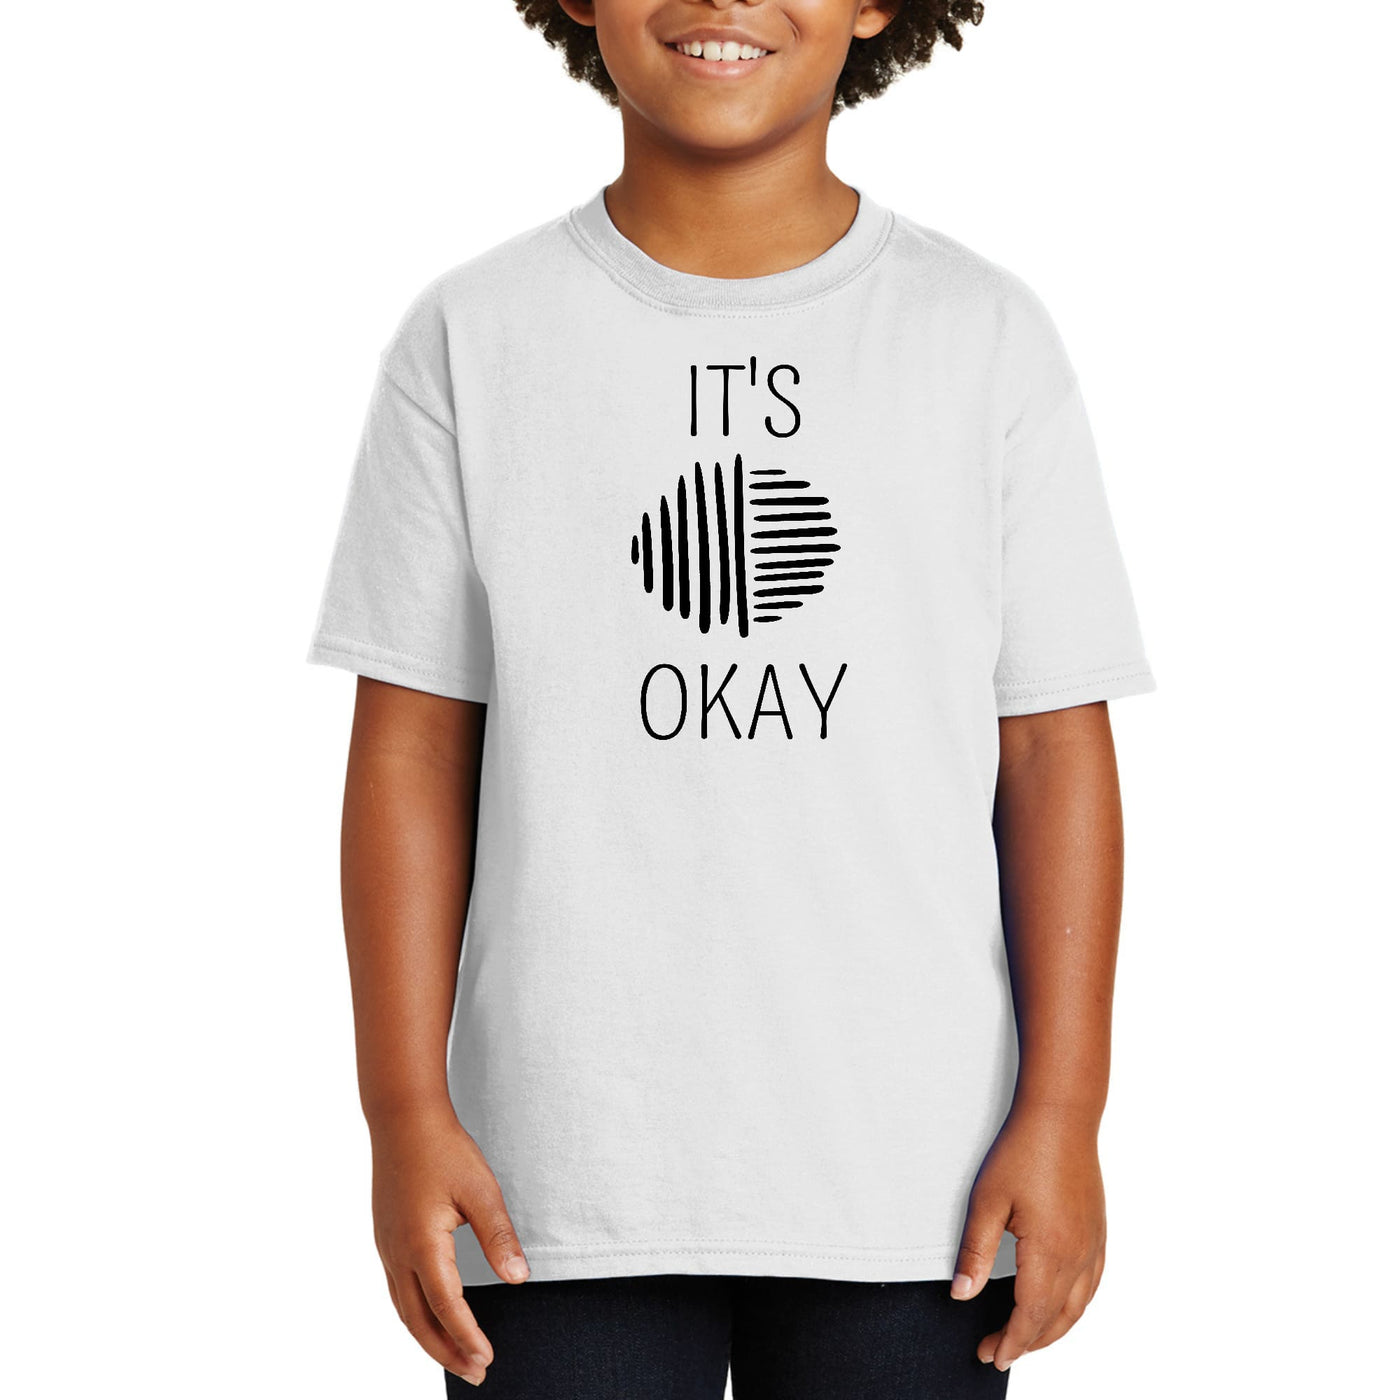 Youth Short Sleeve Graphic T-shirt Say It Soul Its Okay Black Line - Youth